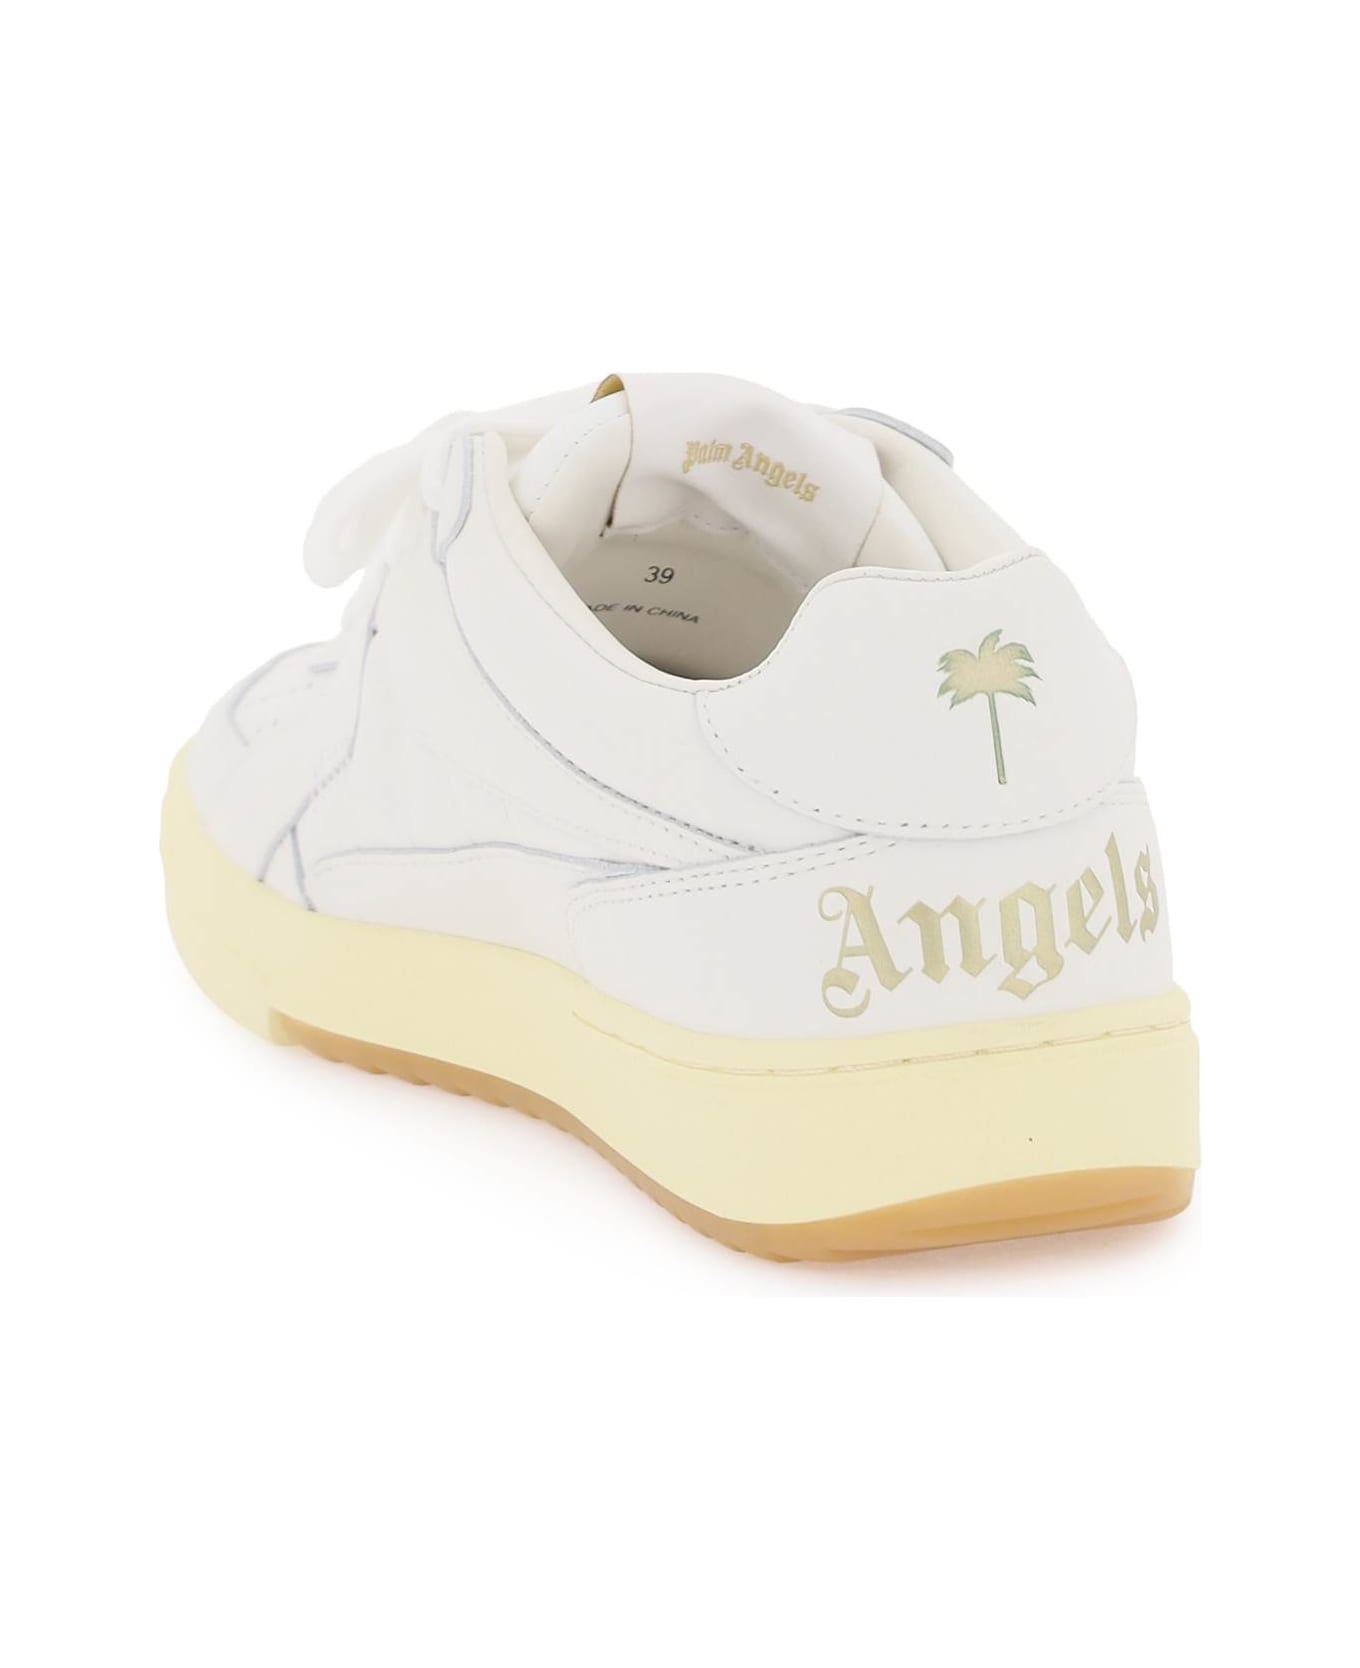 Palm Angels University Leather Sneakers - WHITE WHITE (White)